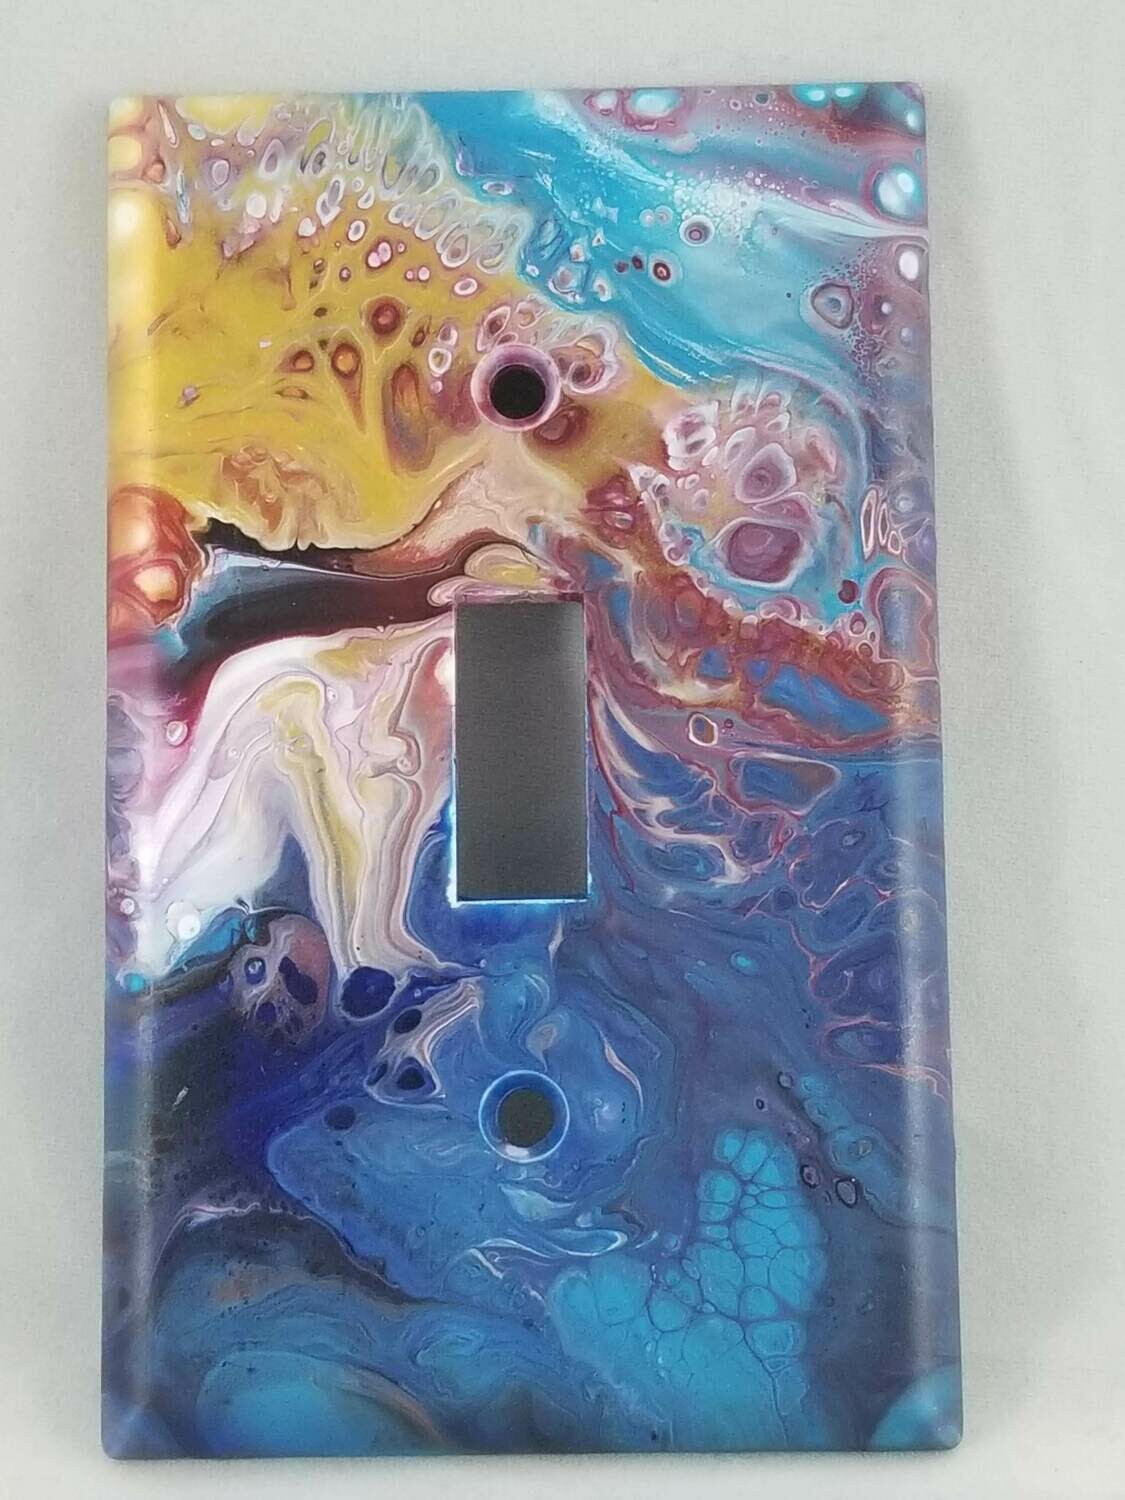 Switch Plate Covers